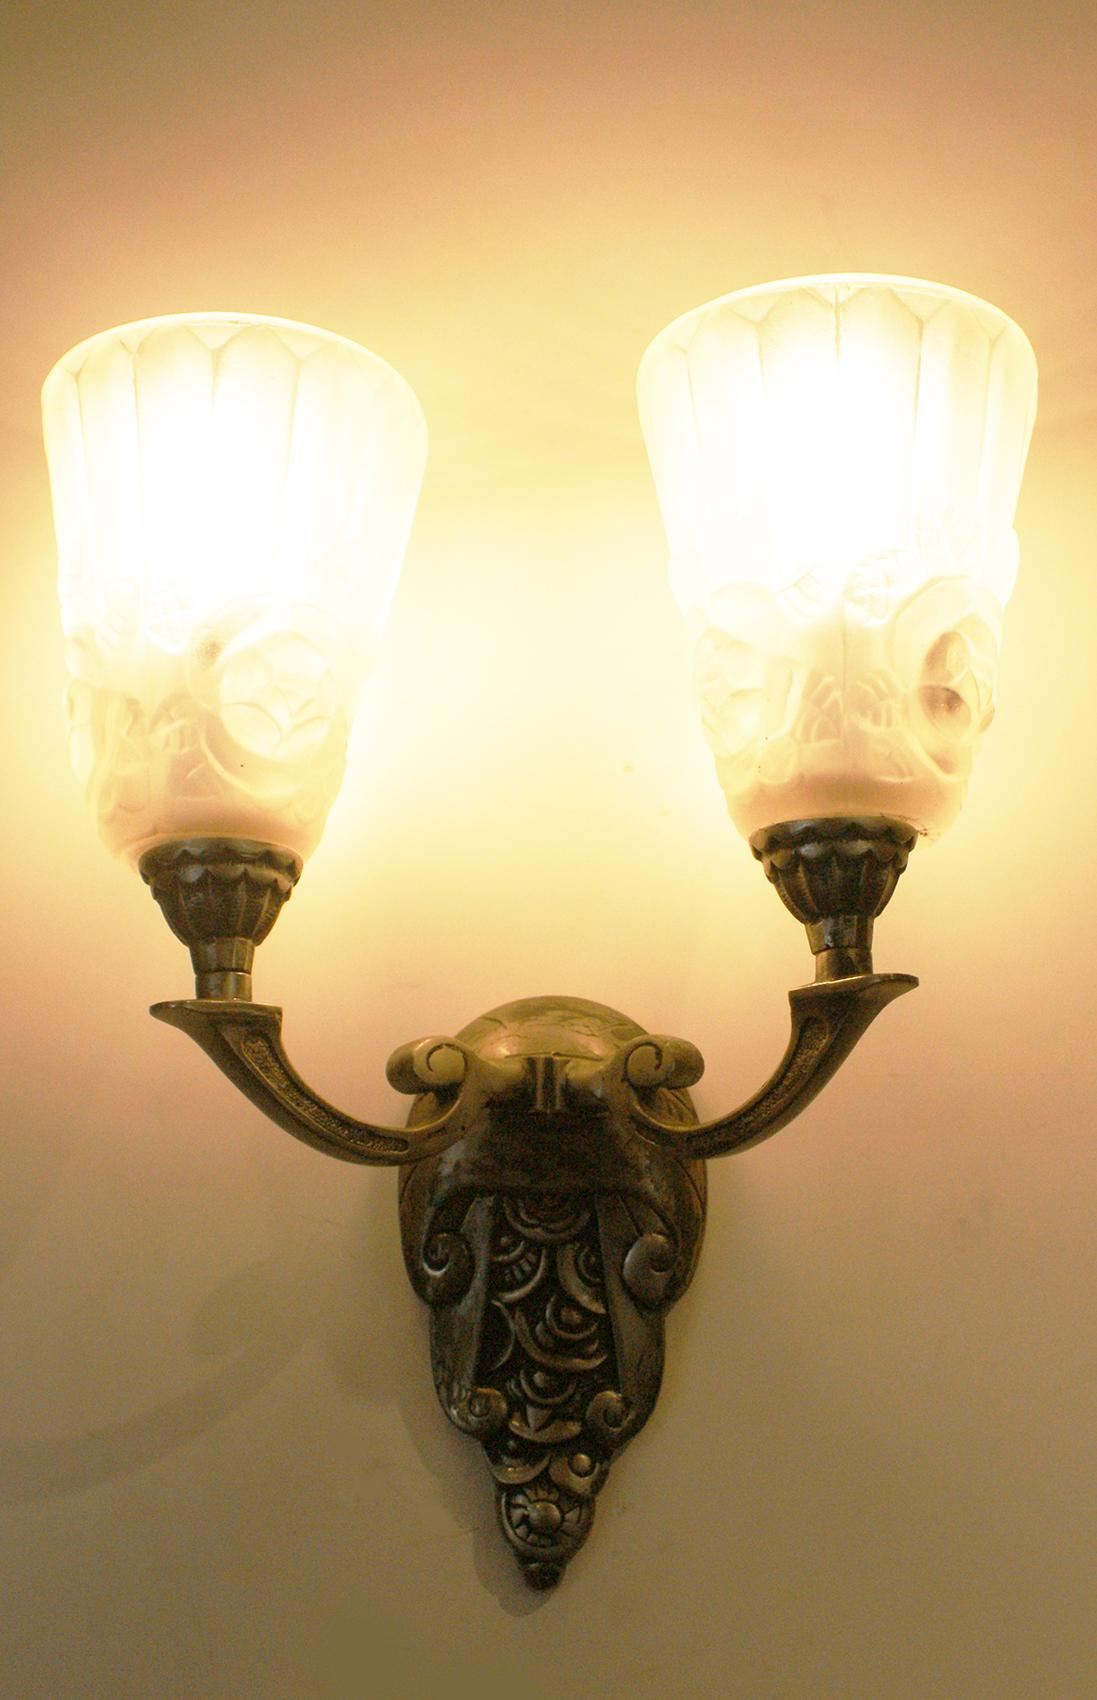 A decorative pair of French Art Deco wall sconces signed “Degué ” consists of a nickel bronze structure with beautiful floral motif design in the central of the sconces and two arms supporting two tulips in molded clear frosted glass, each tulip is